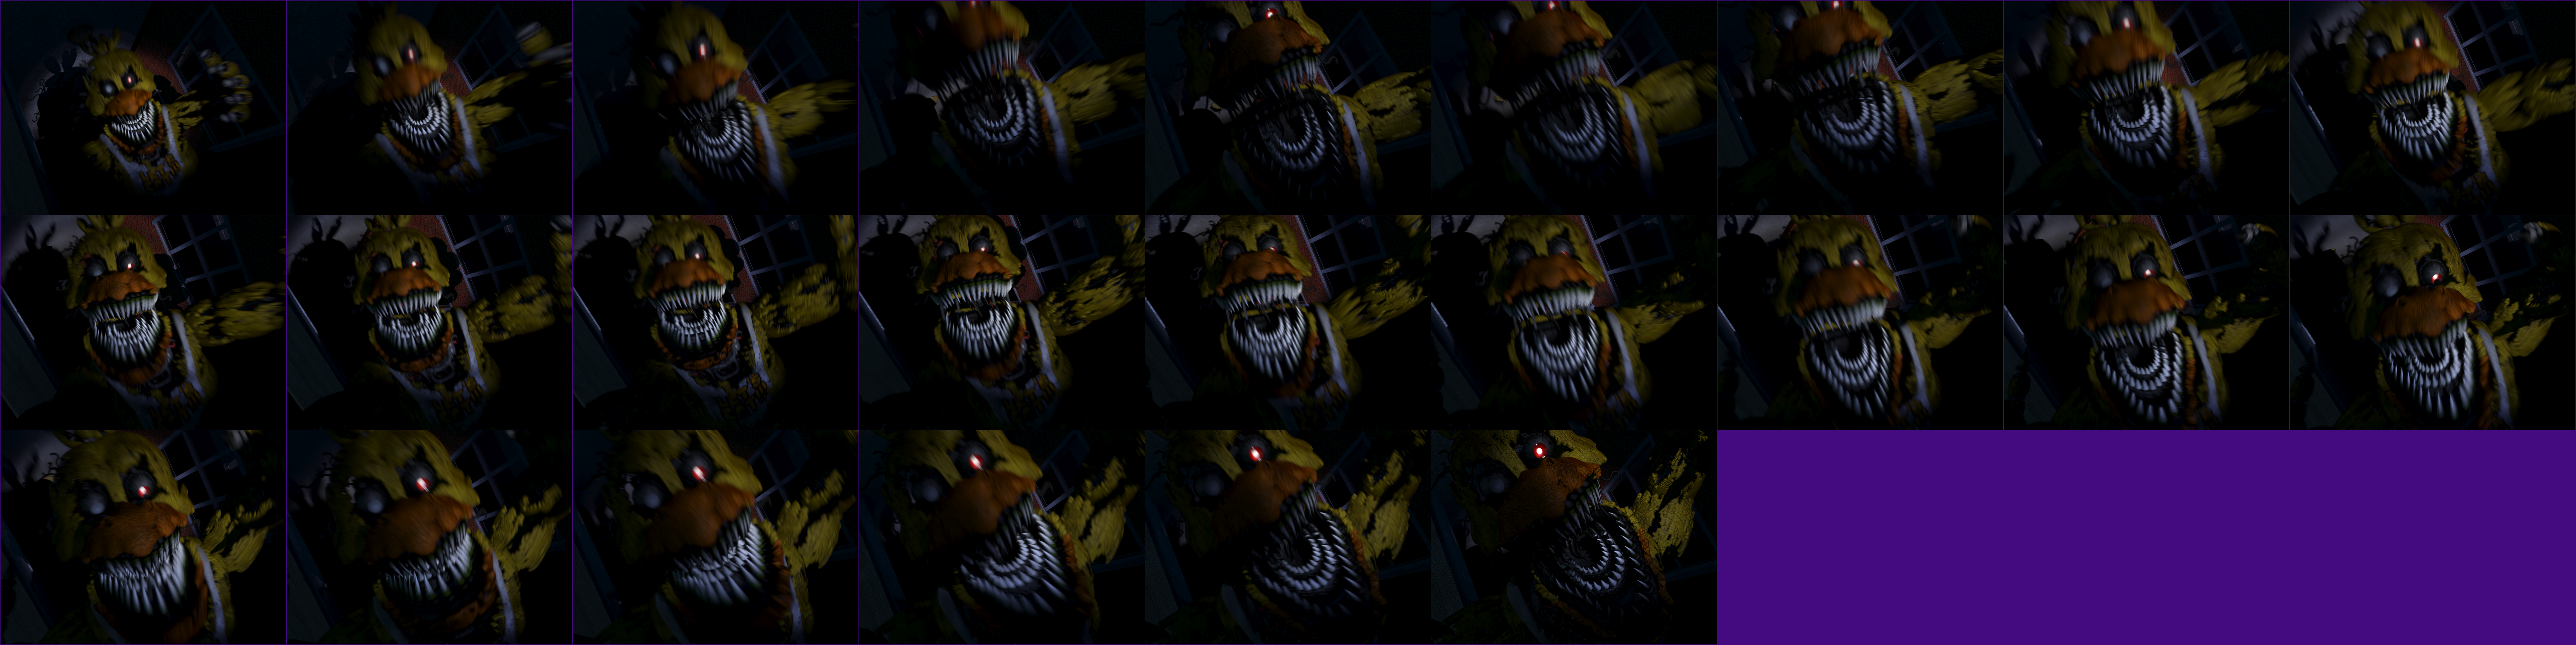 Five Nights at Freddy's 4 - Nightmare Chica